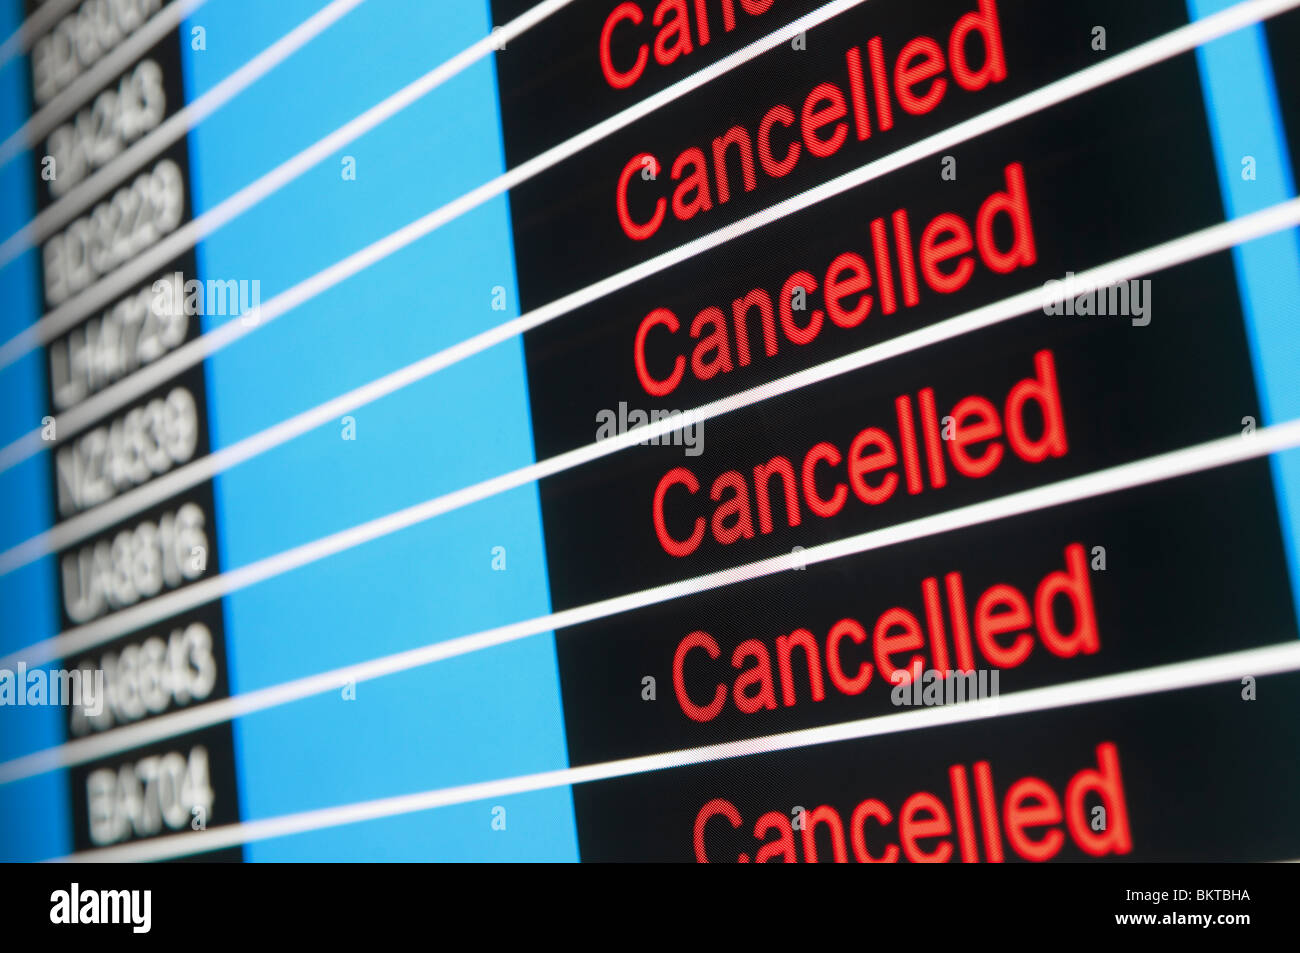 Airport Display Announcing Cancelled Flights Stock Photo